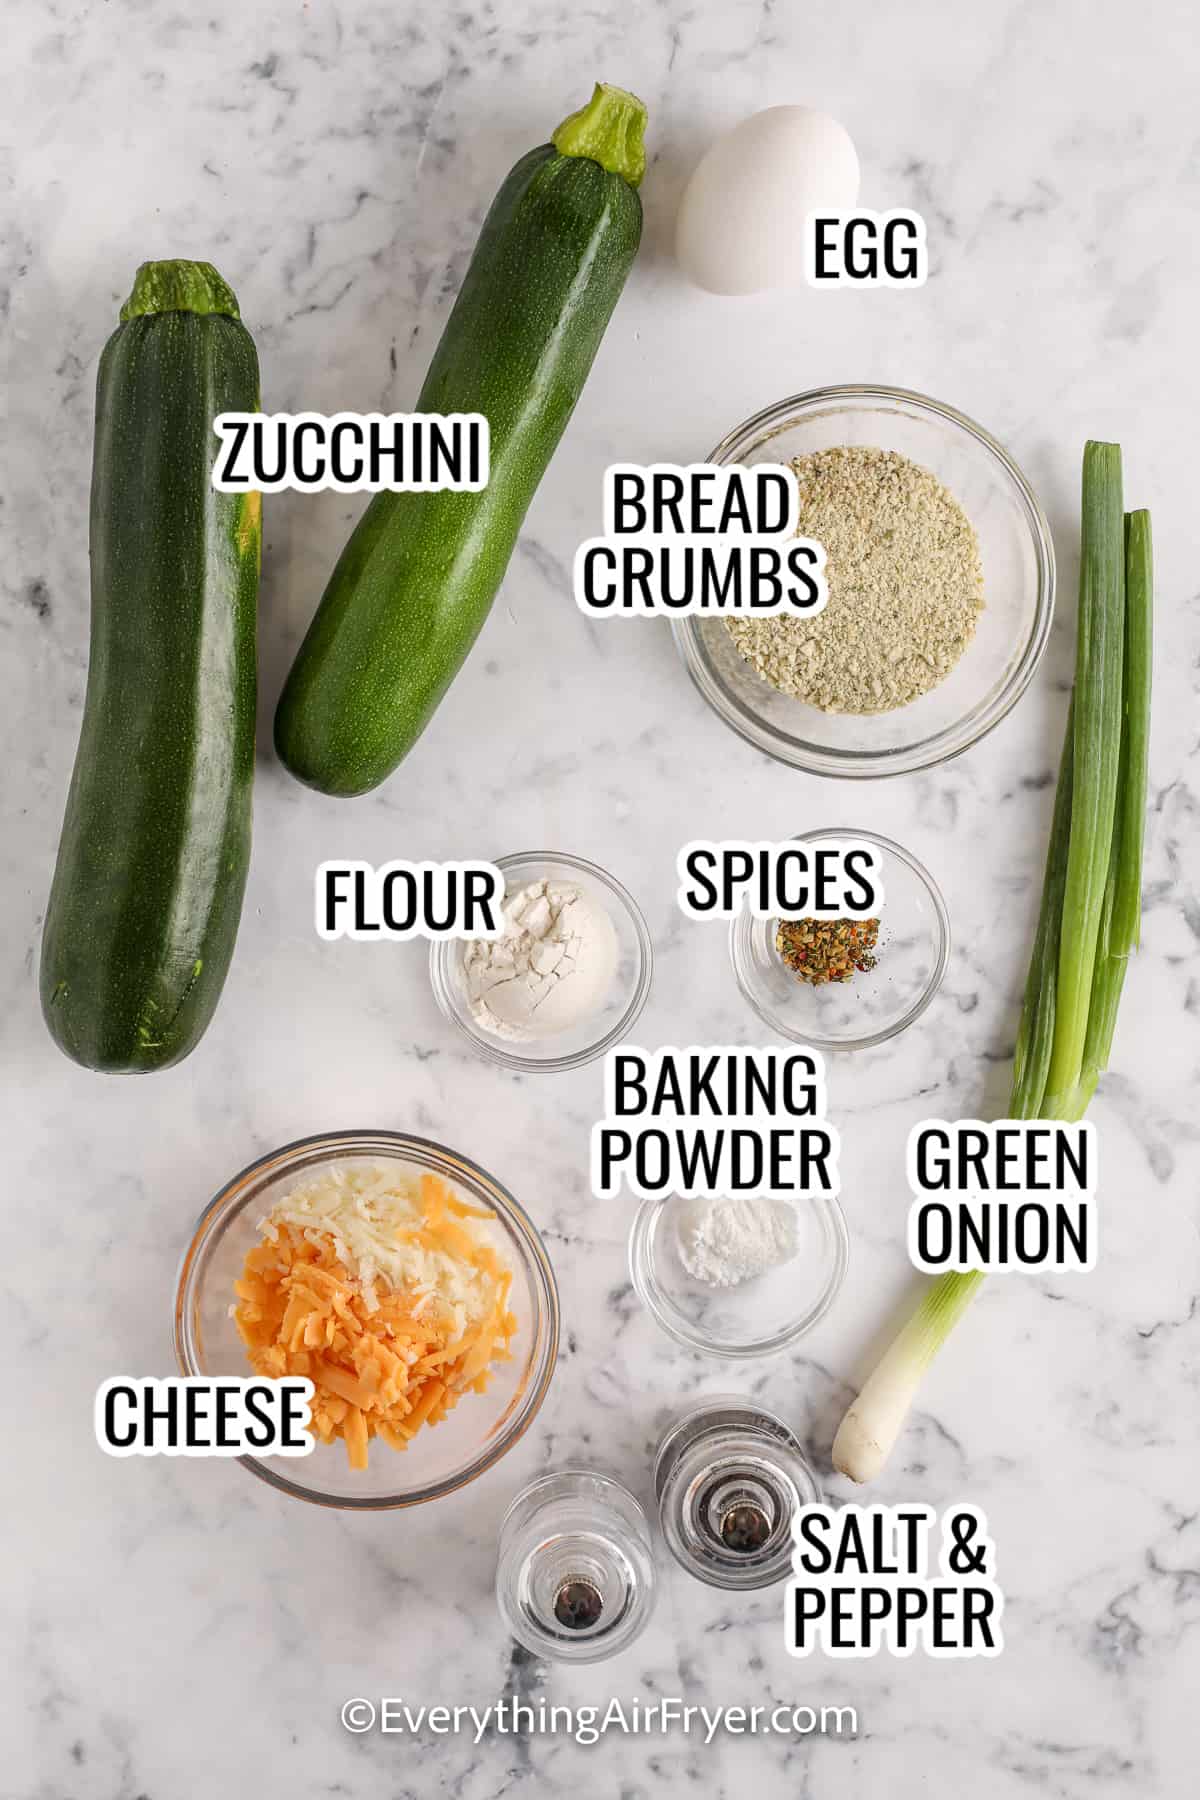 ingredients assembled to make air fryer zucchini fritters including zucchini, green onions, cheese, flour, bread crumbs, and spices